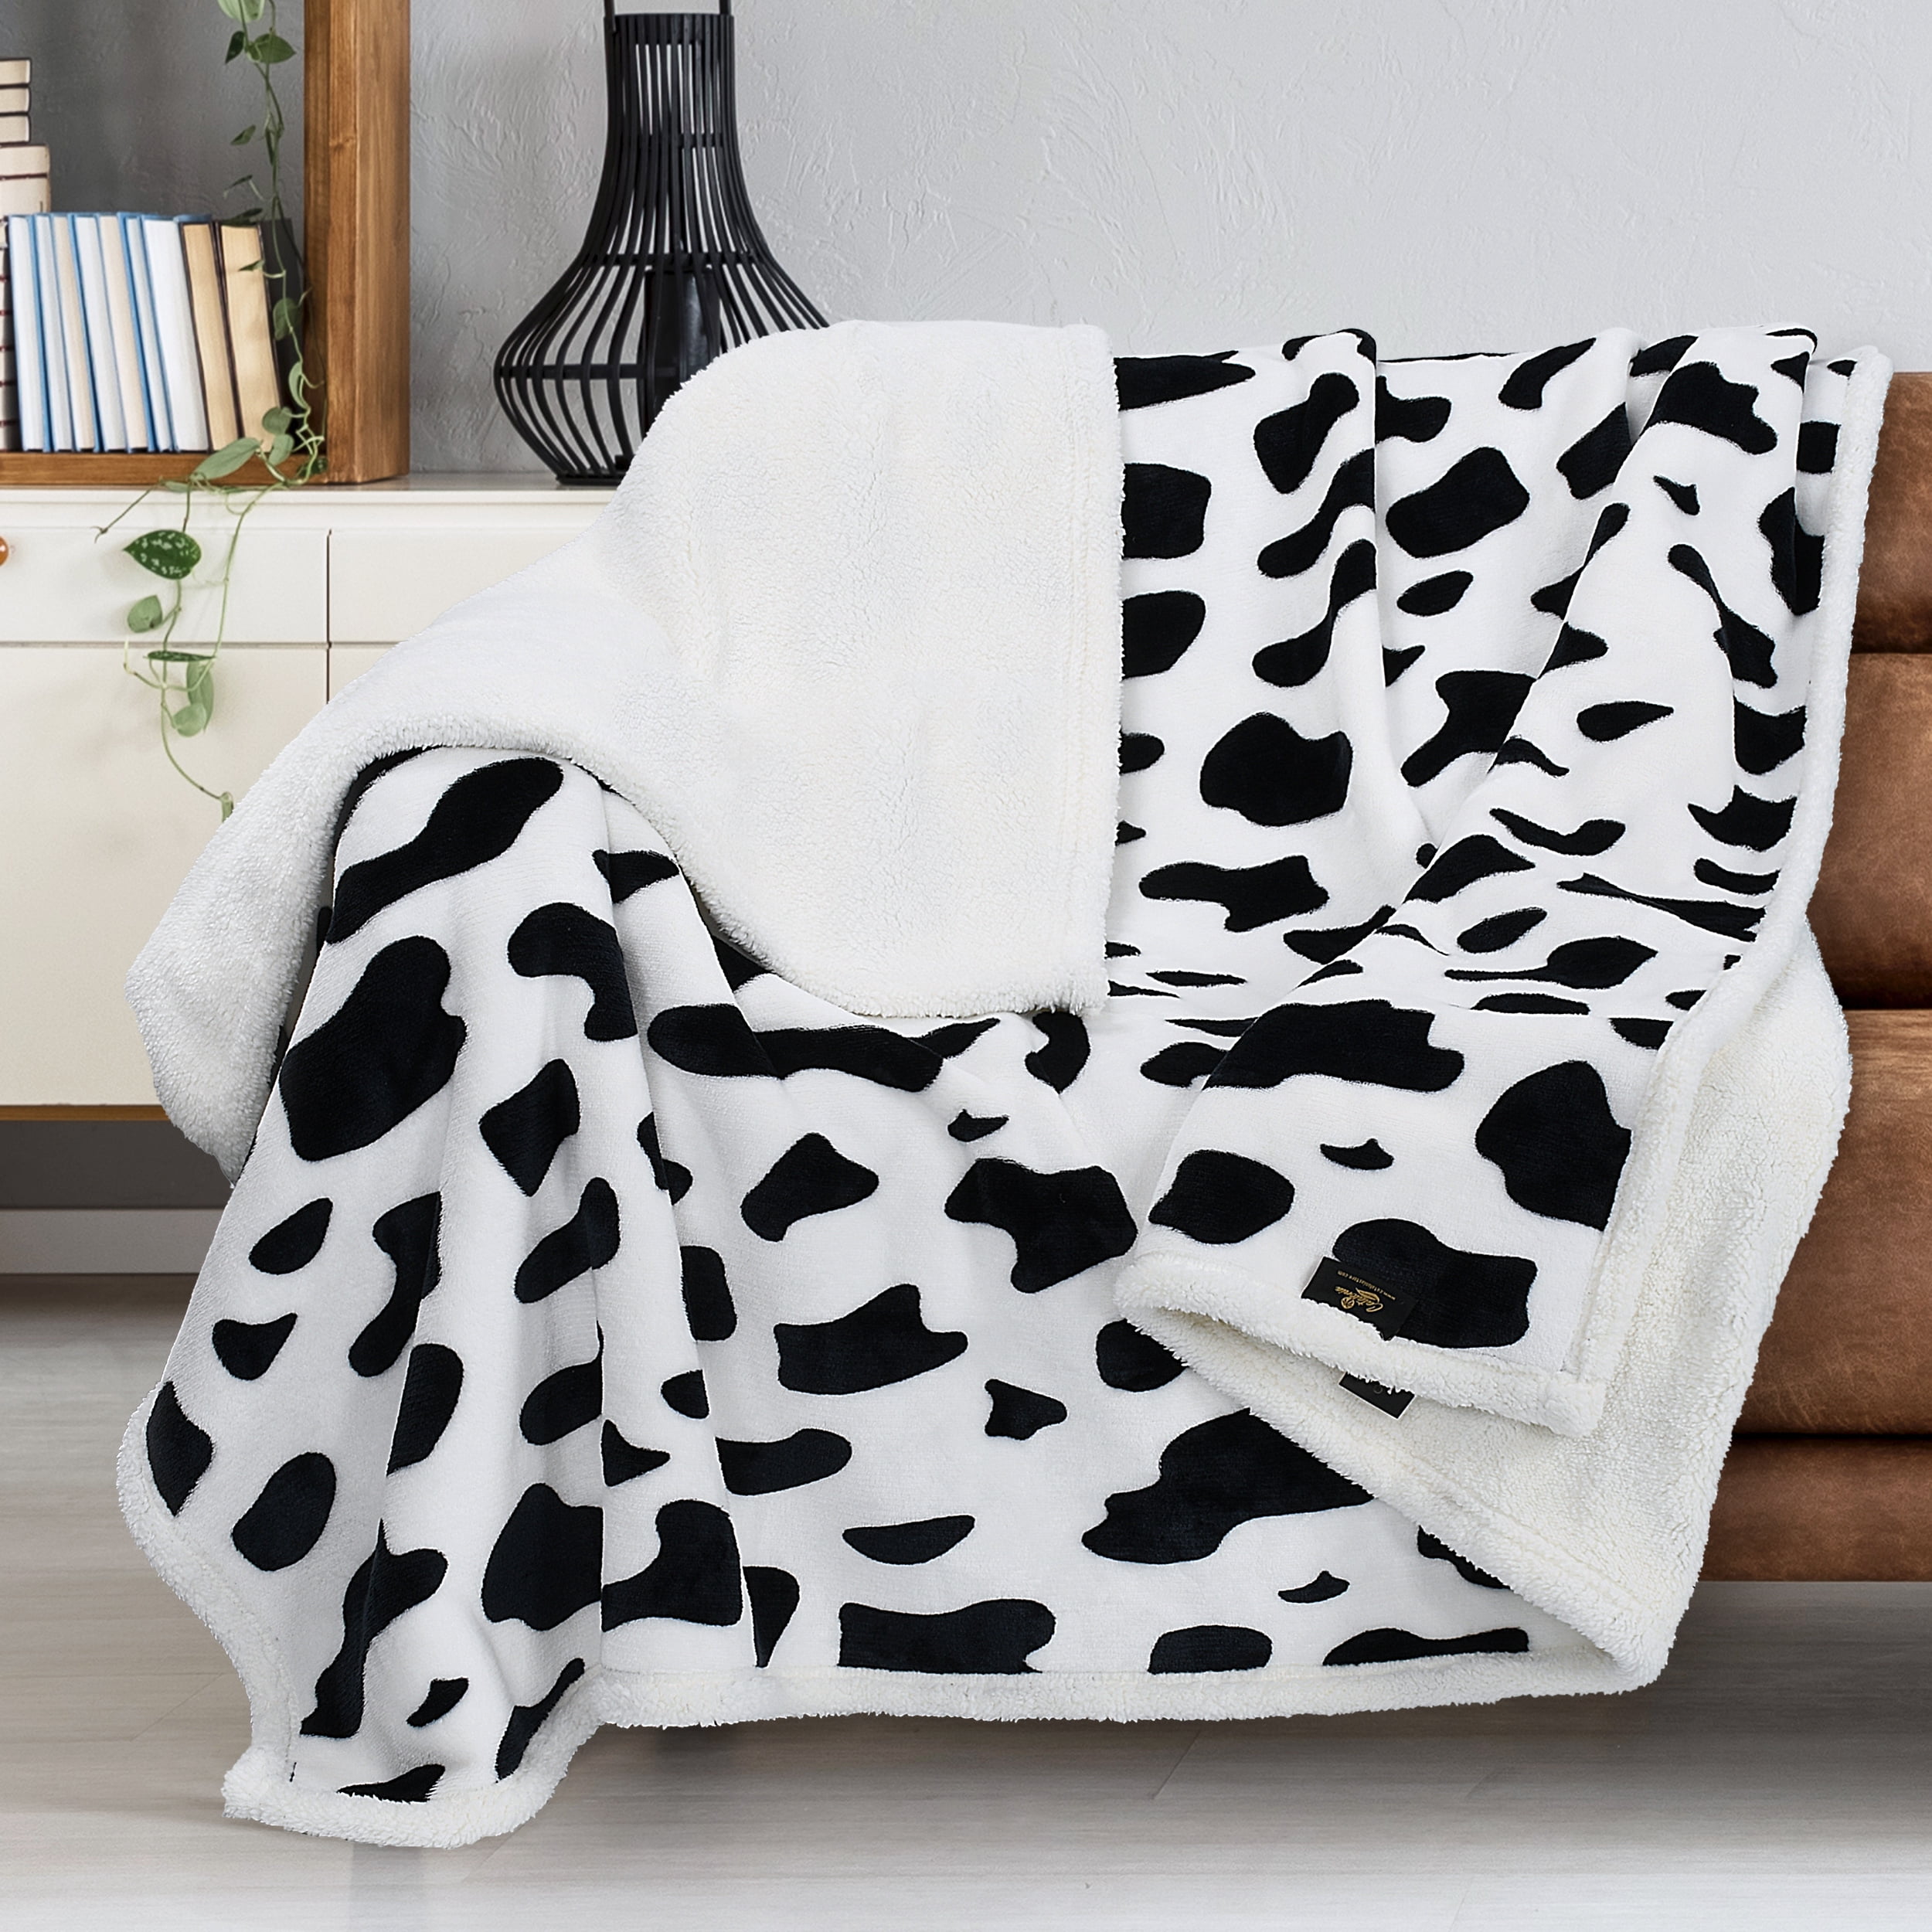 Details about   Cow Skin Holstein Dalmation Faux Fur Sherpa Oversized Throw Blanket 50" x 70" 